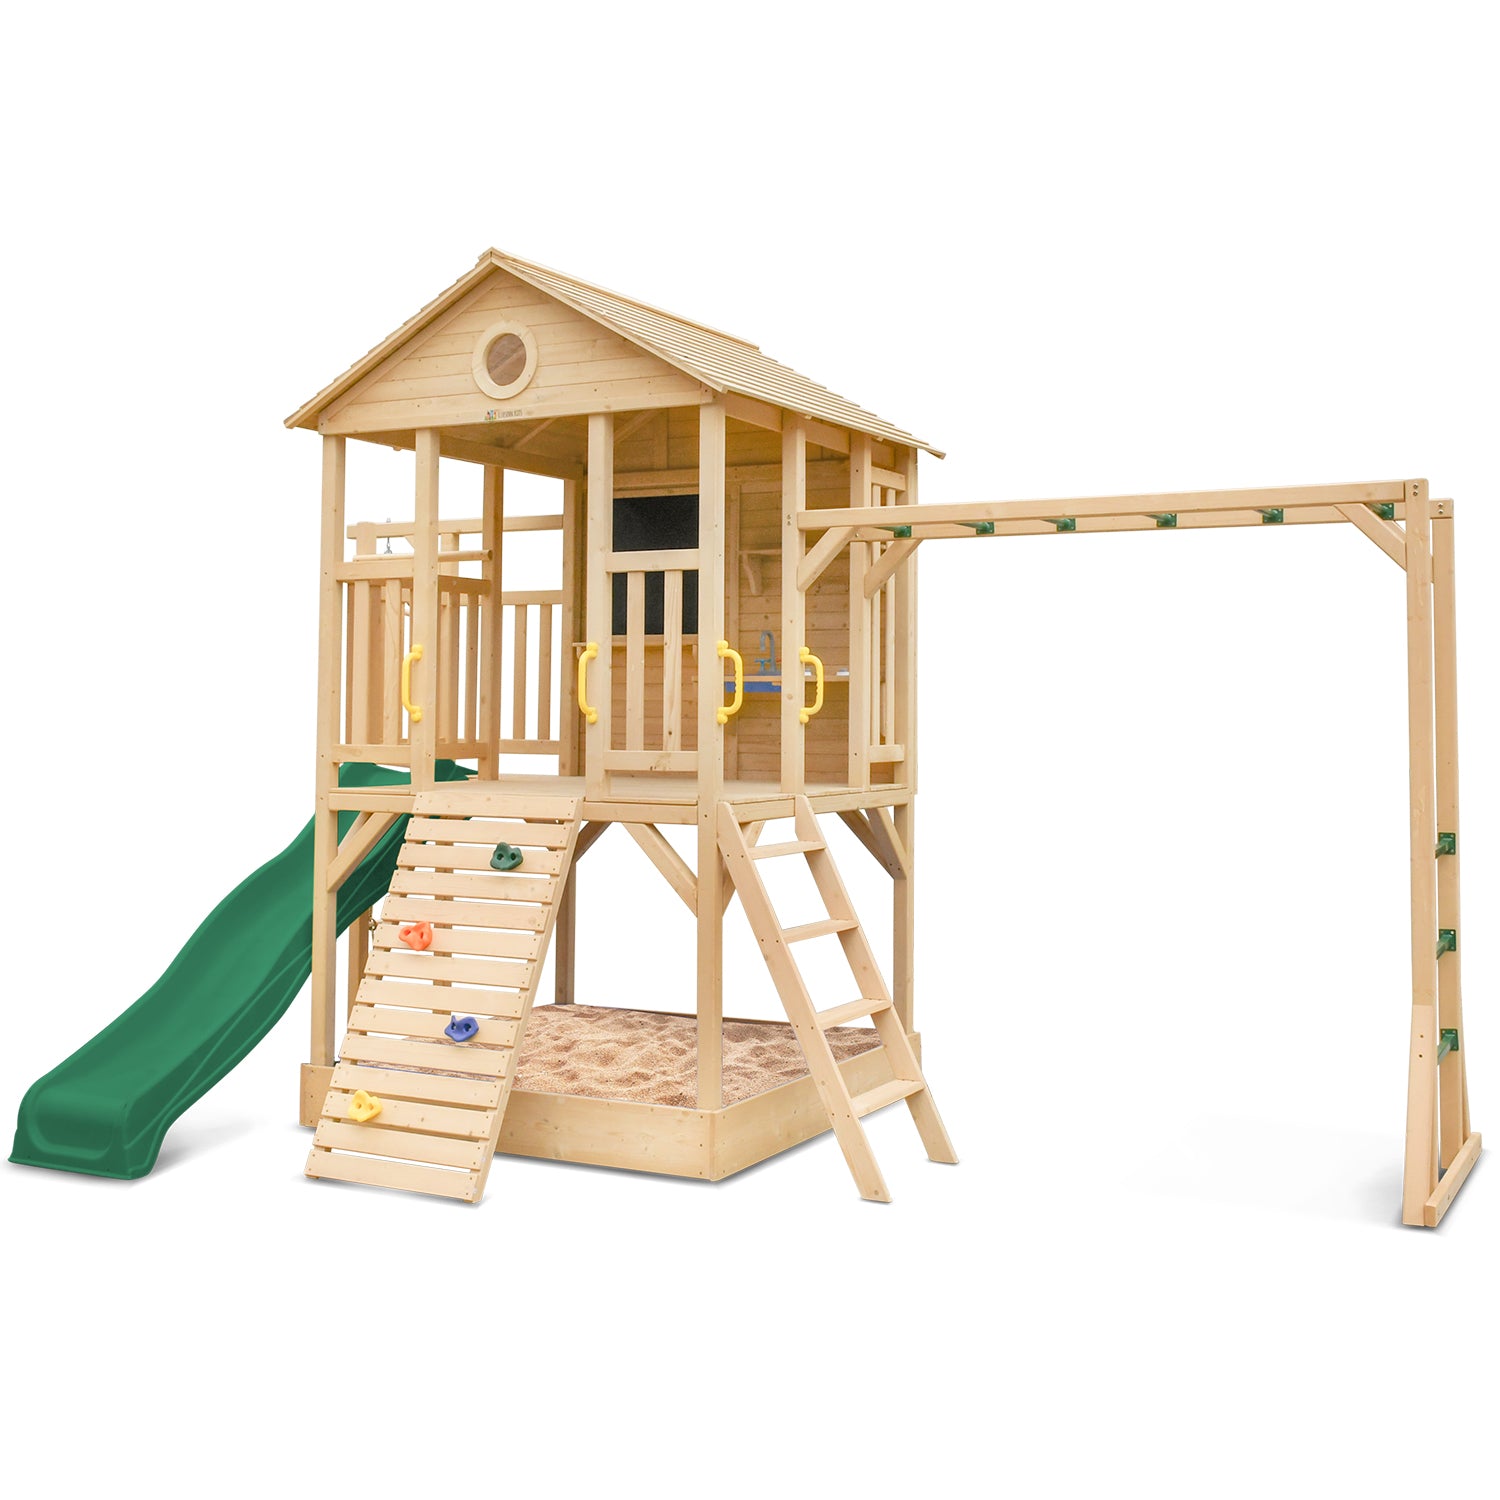 Lifespan Kids Kingston Cubby House with 2.2m Green Slide